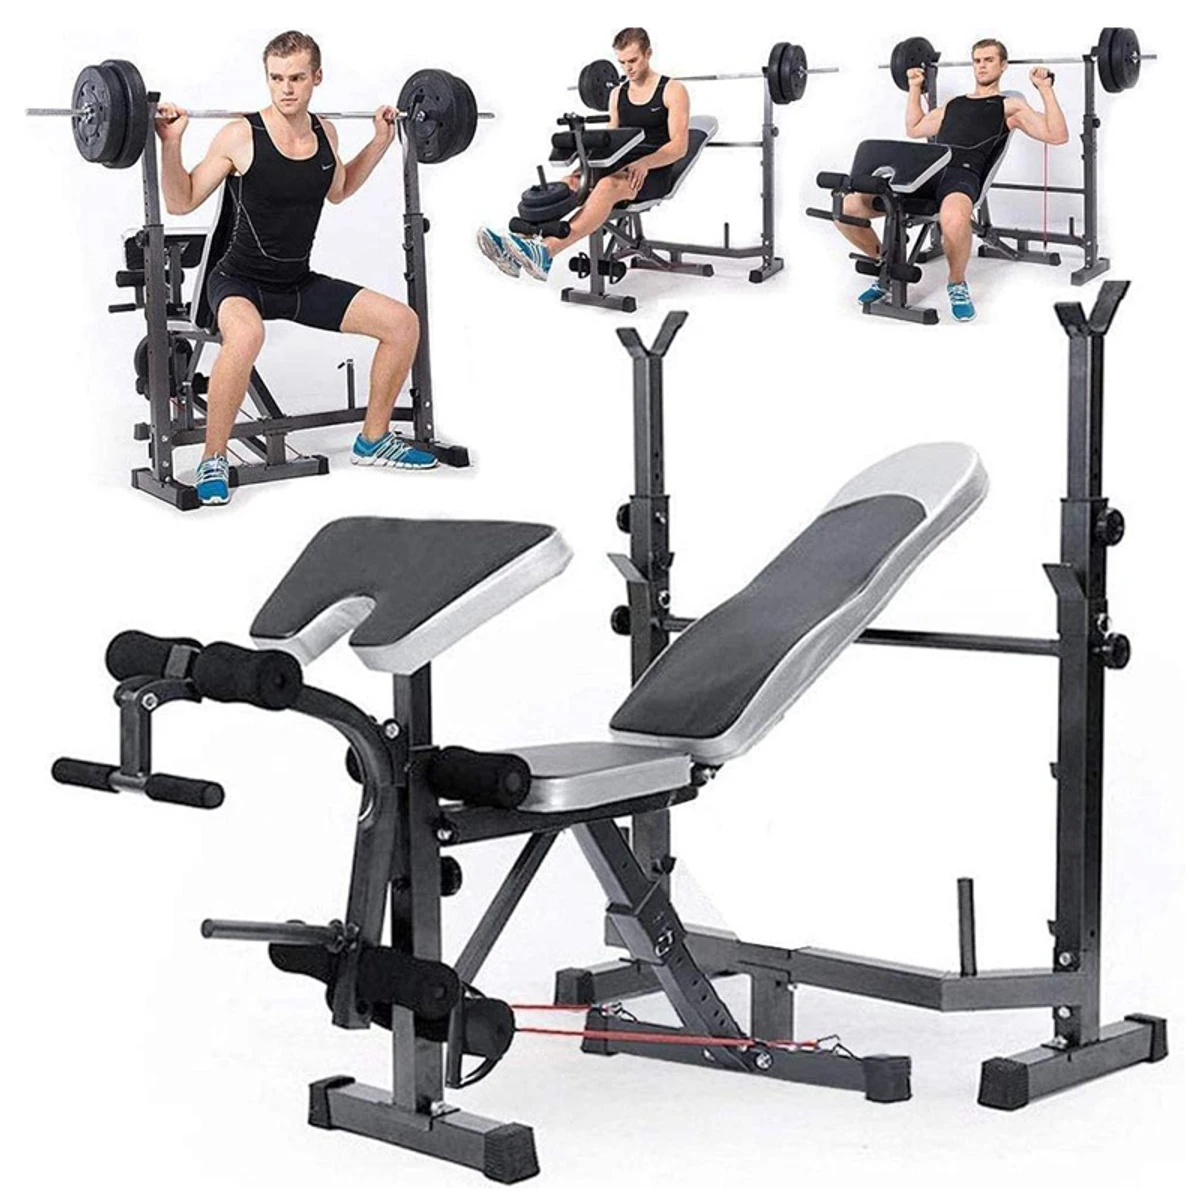 Olympic Weight Bench, Adjustable Weight Lift Bench Rack Set, Fitness Barbell Dumbbell Bench, Push Up Back Sit Up Bench,